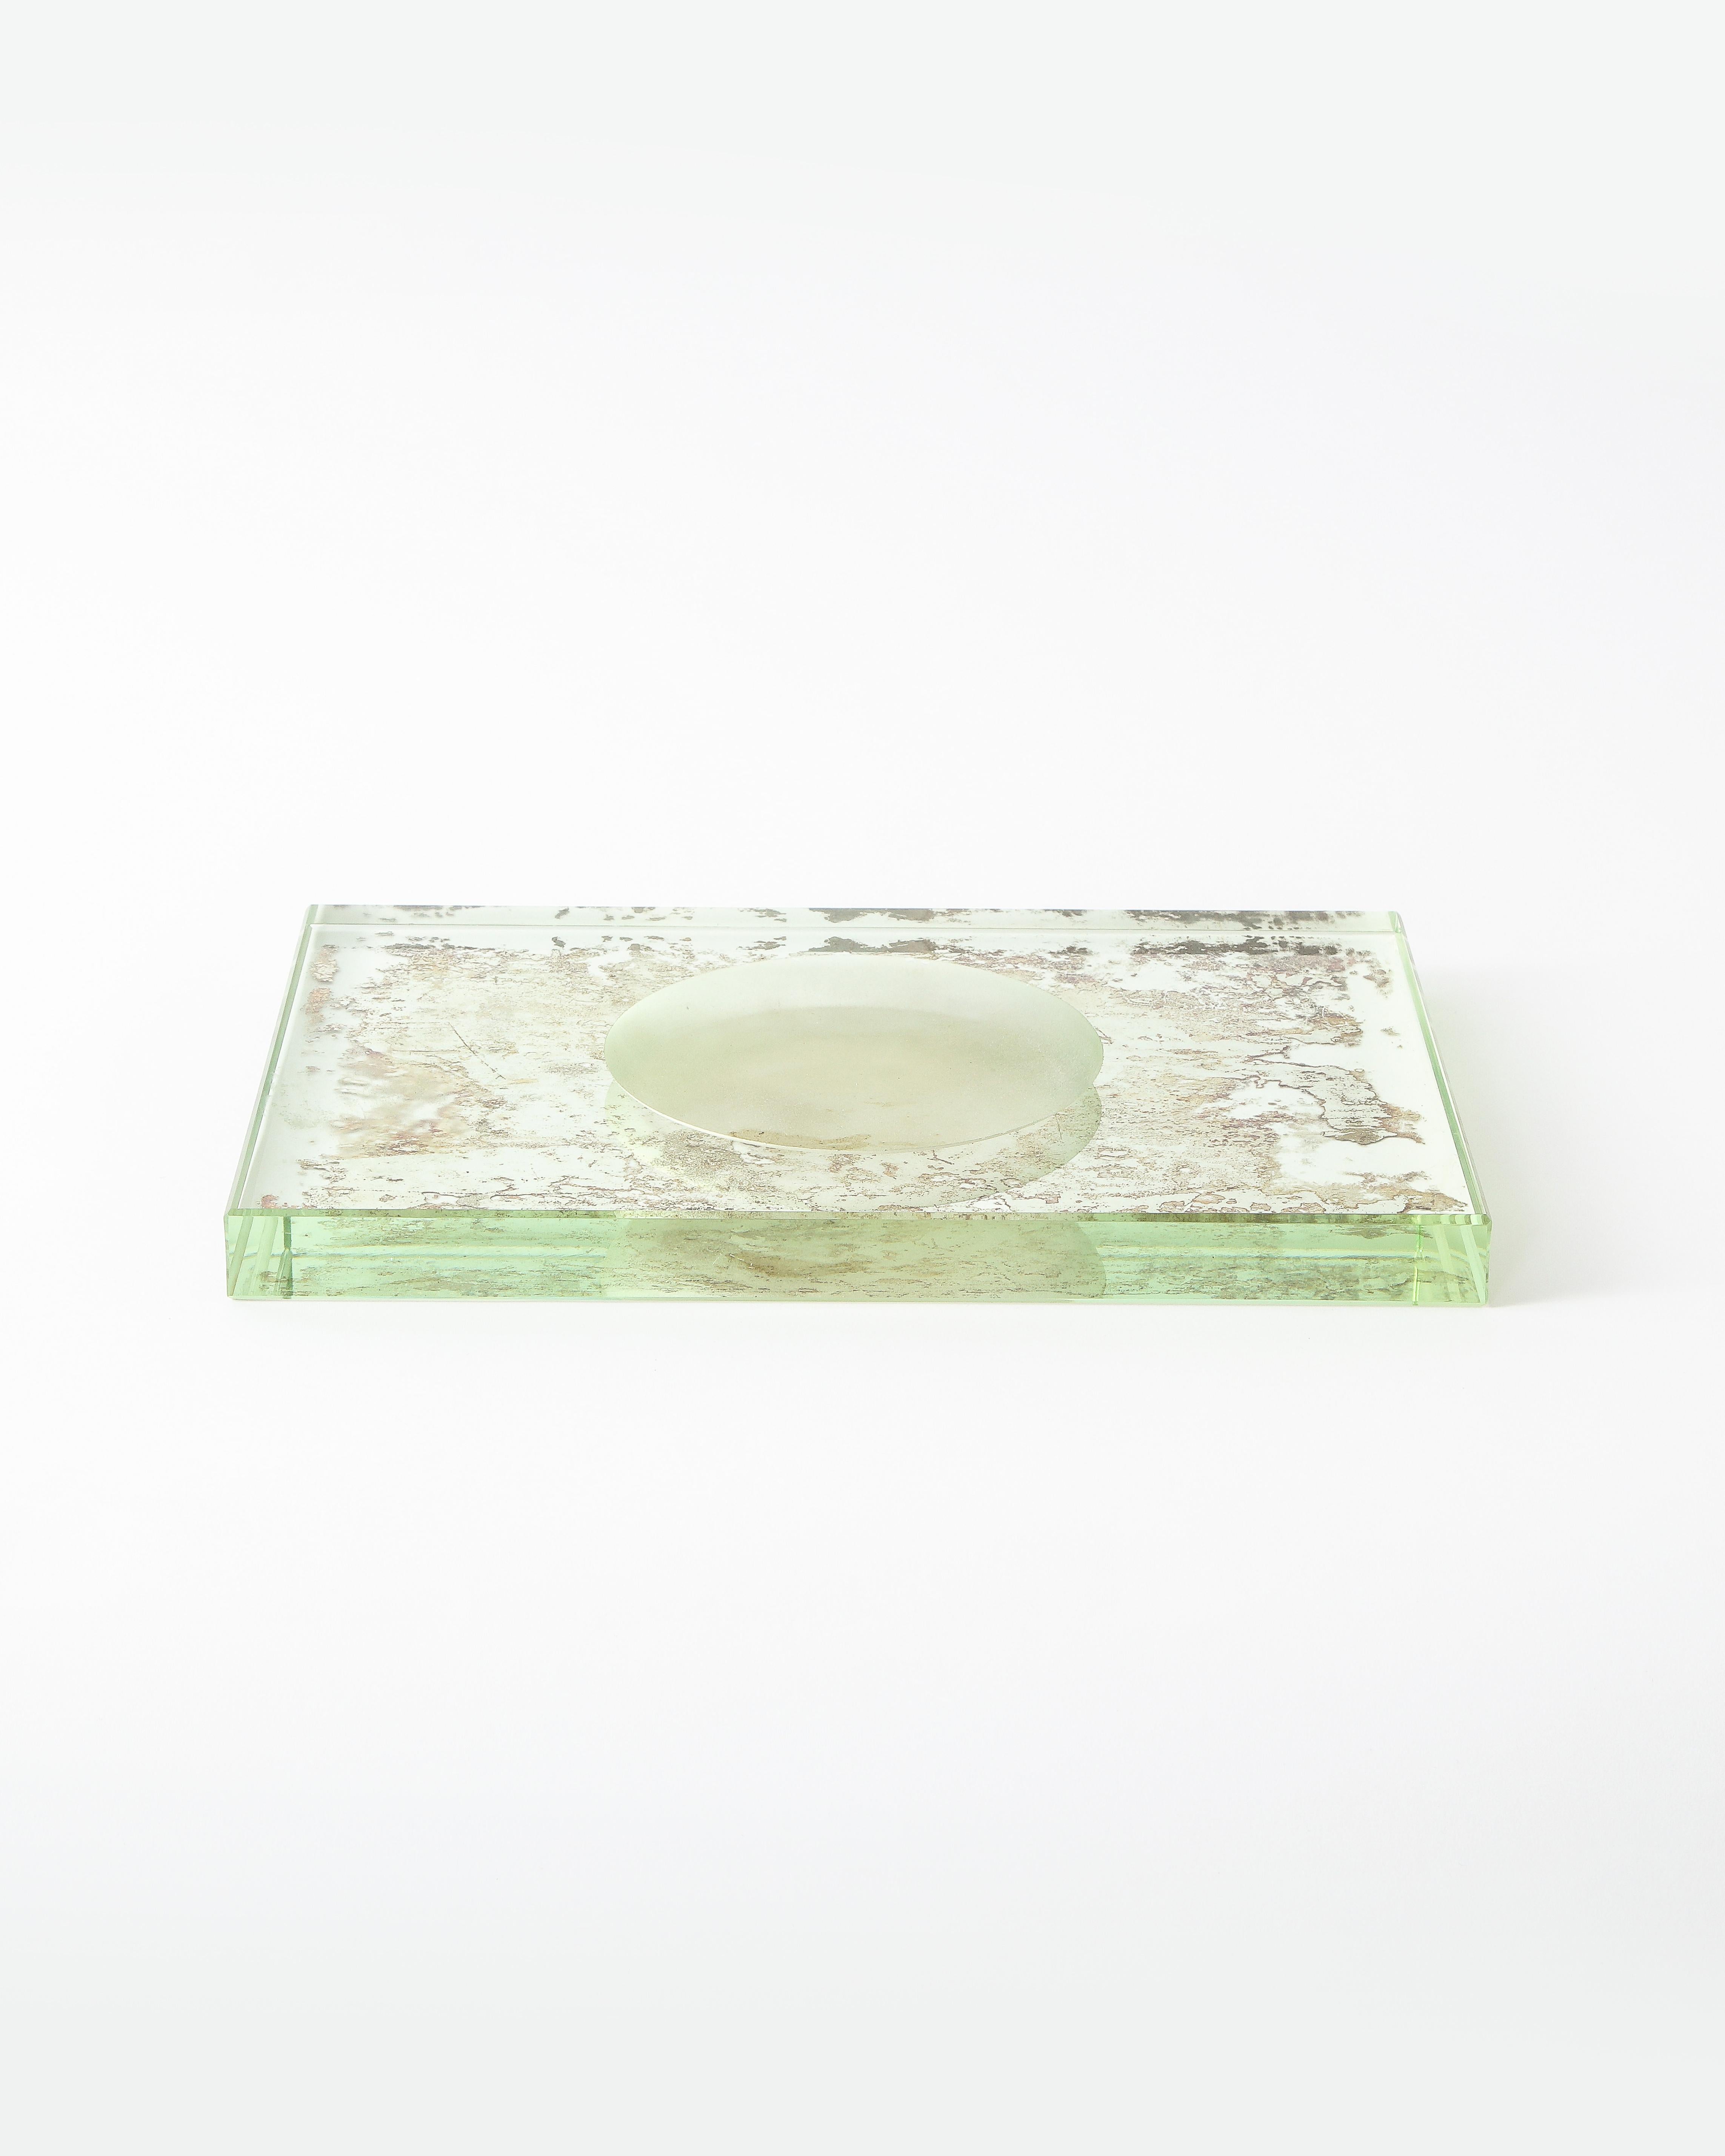 Decorative dish in Classic French cast glass from the St. Gobain foundry.

A solid heavy piece of sandblasted glass, this sculptural piece has great mass complemented by the model effect of the antique mirror backing.

Modernist lines. Excellent